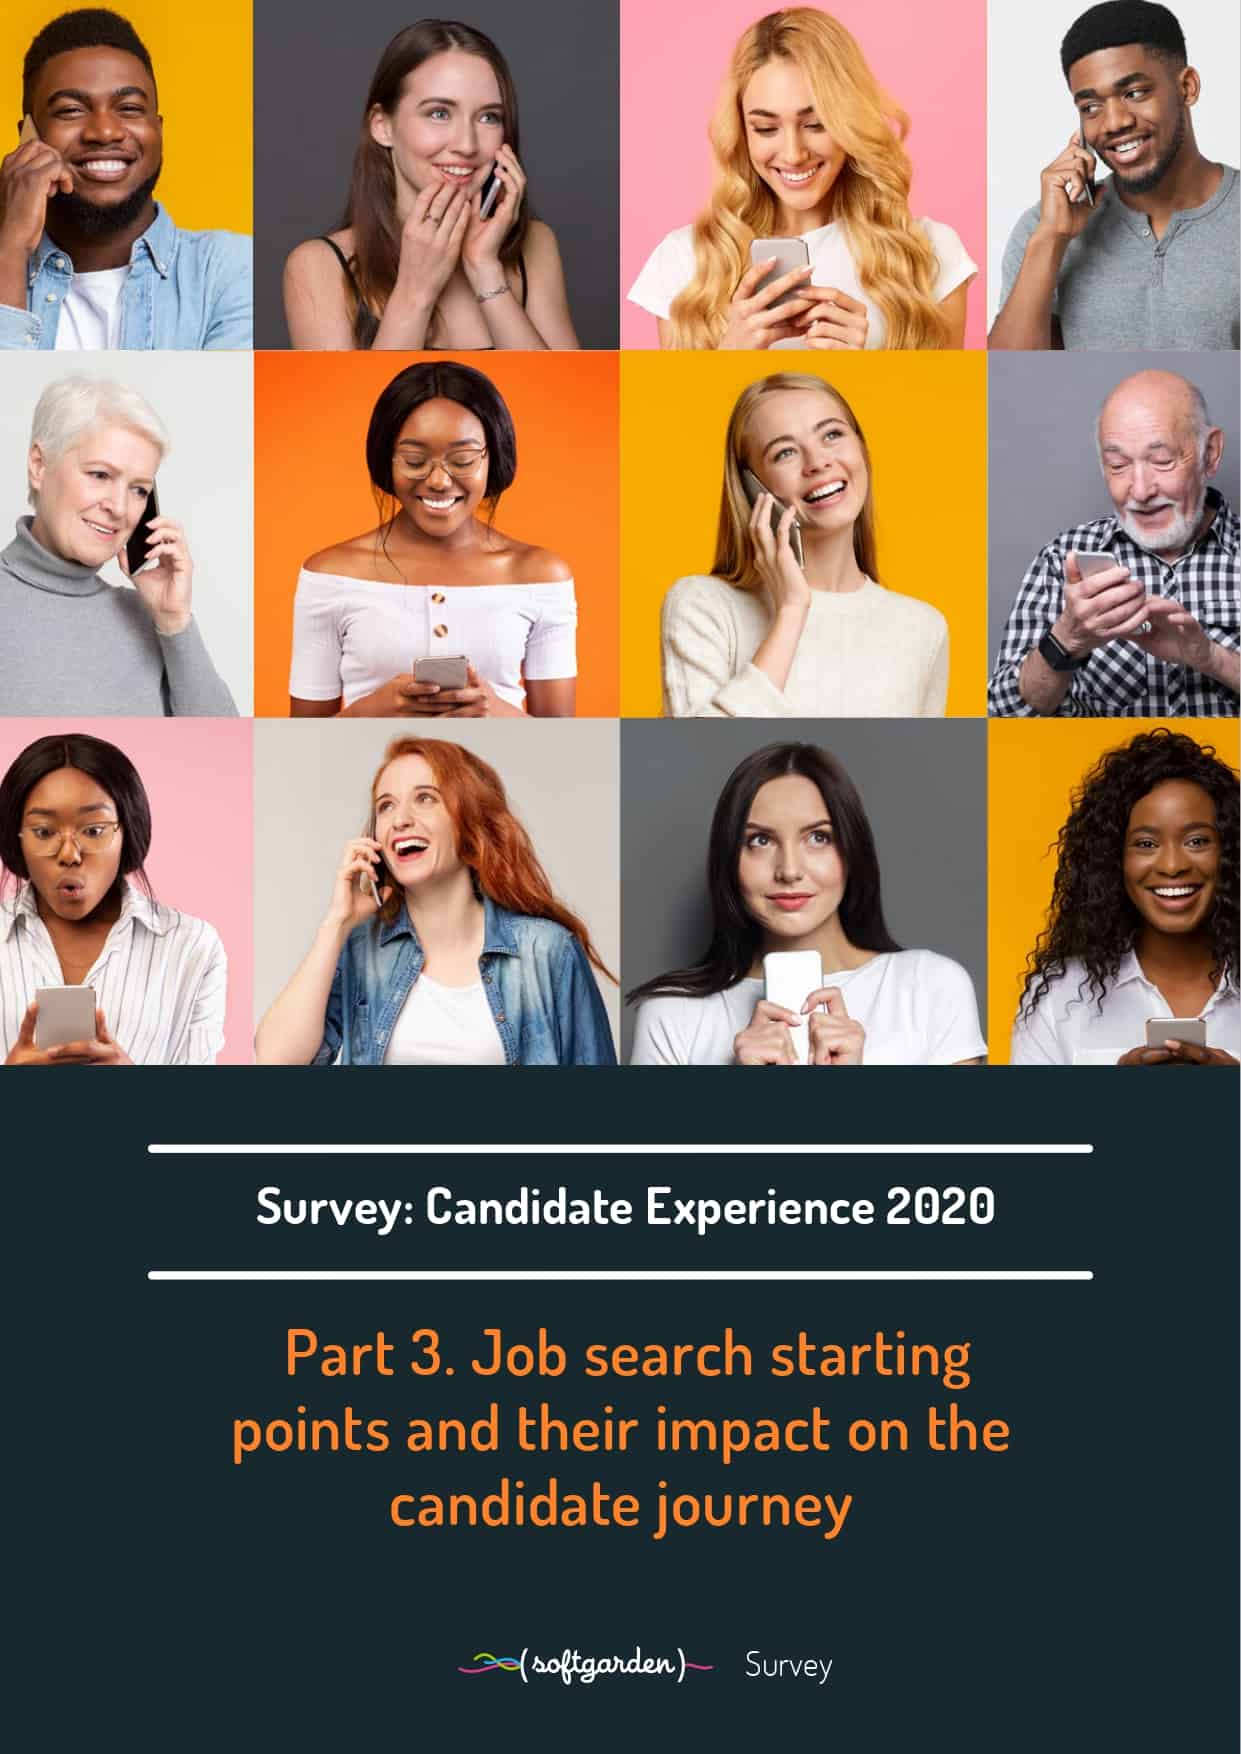 Candidate Experience 2020 (Part 3): Impact on the Candidate Journey